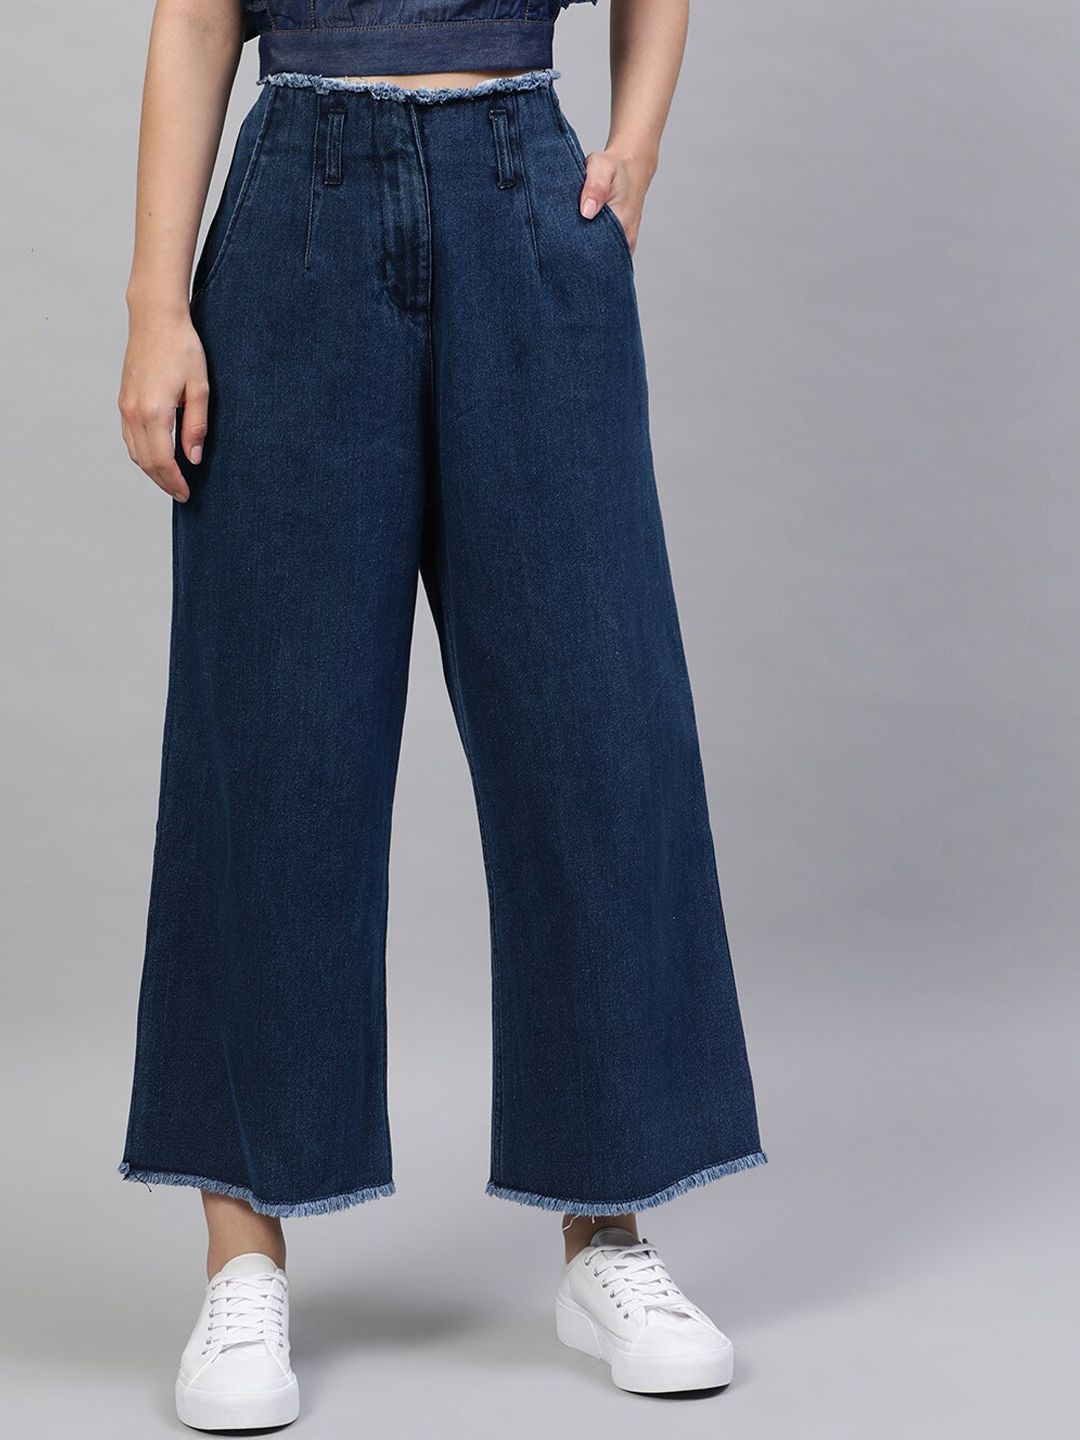 STREET 9 Women Blue Flared Faded Parallel Trousers Price in India